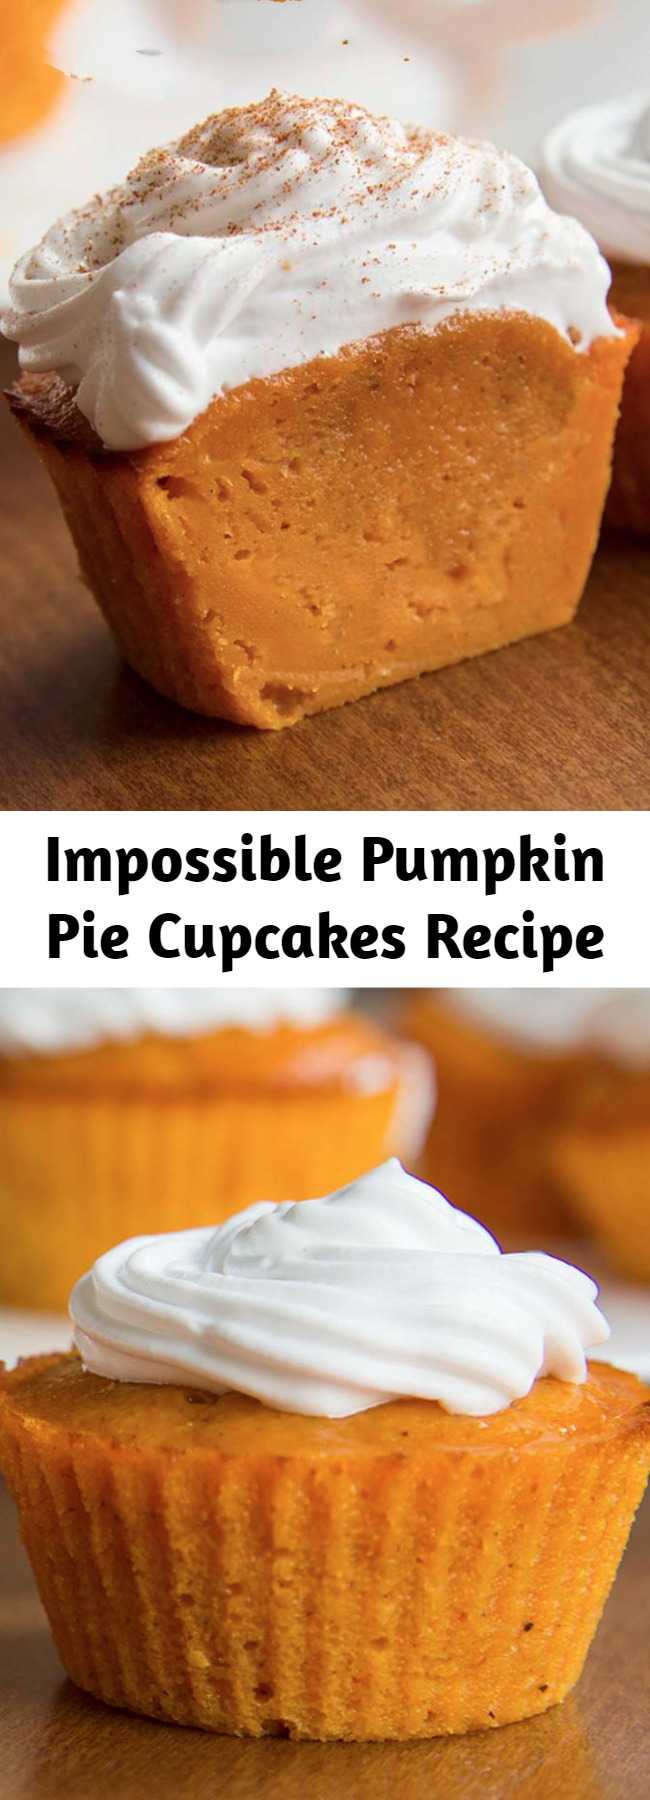 Impossible Pumpkin Pie Cupcakes Recipe - Impossible Perfect Fall treat! De-lic-ious Pumpkin Pie Cupcakes. They taste just like pumpkin pie filling, but are sturdy enough to eat with your hands. You’ll love these because they’re not overly sweet, and they’re pumpkin-y without being overpowering, plus the batter is crazy easy to make too. #recipes #pumpkin #cupcakes